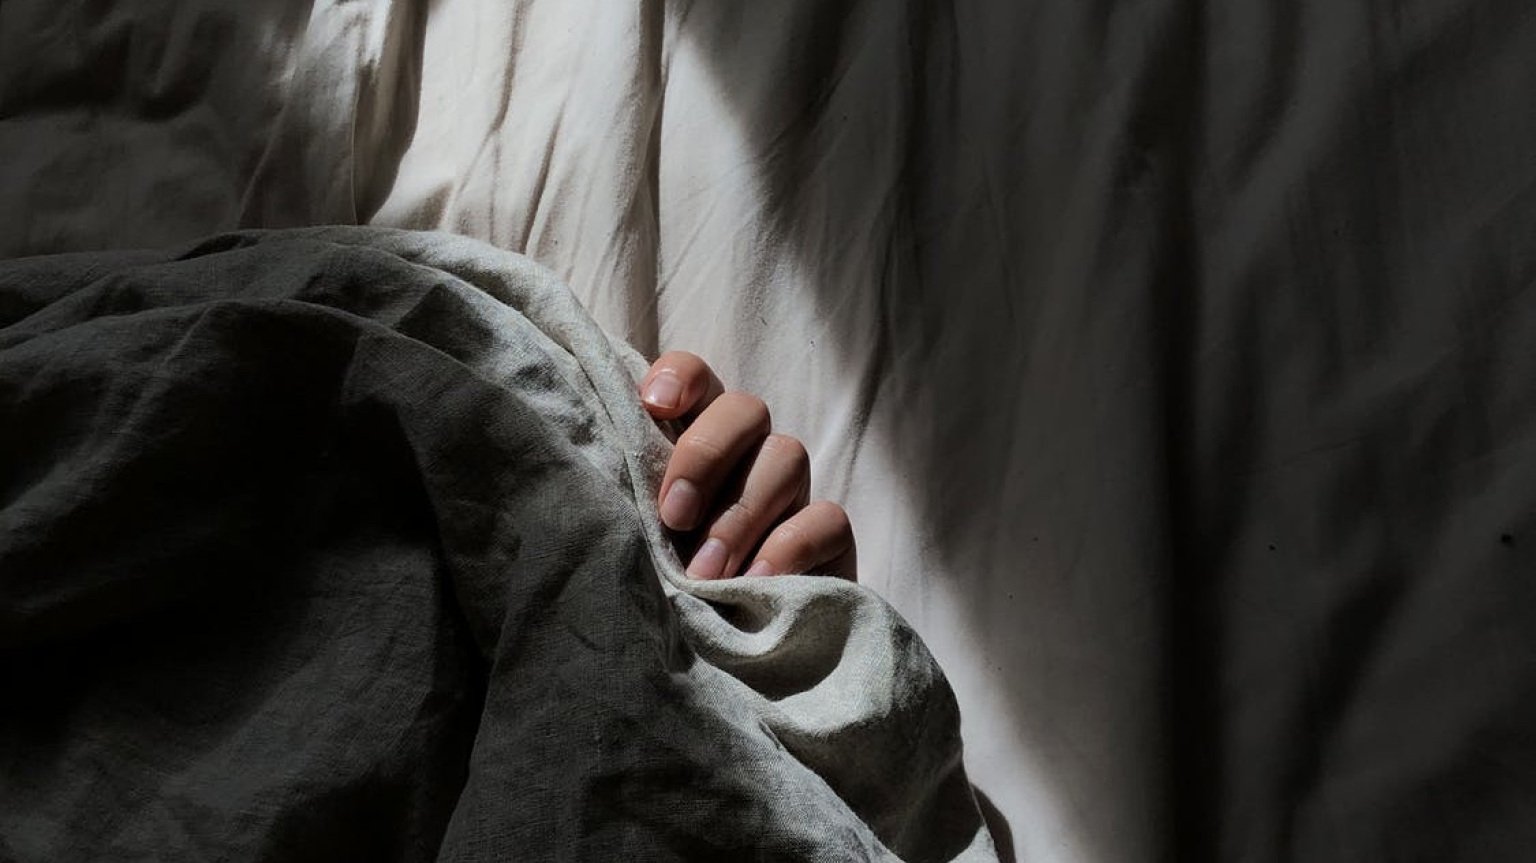 a person gripping on to bedsheets